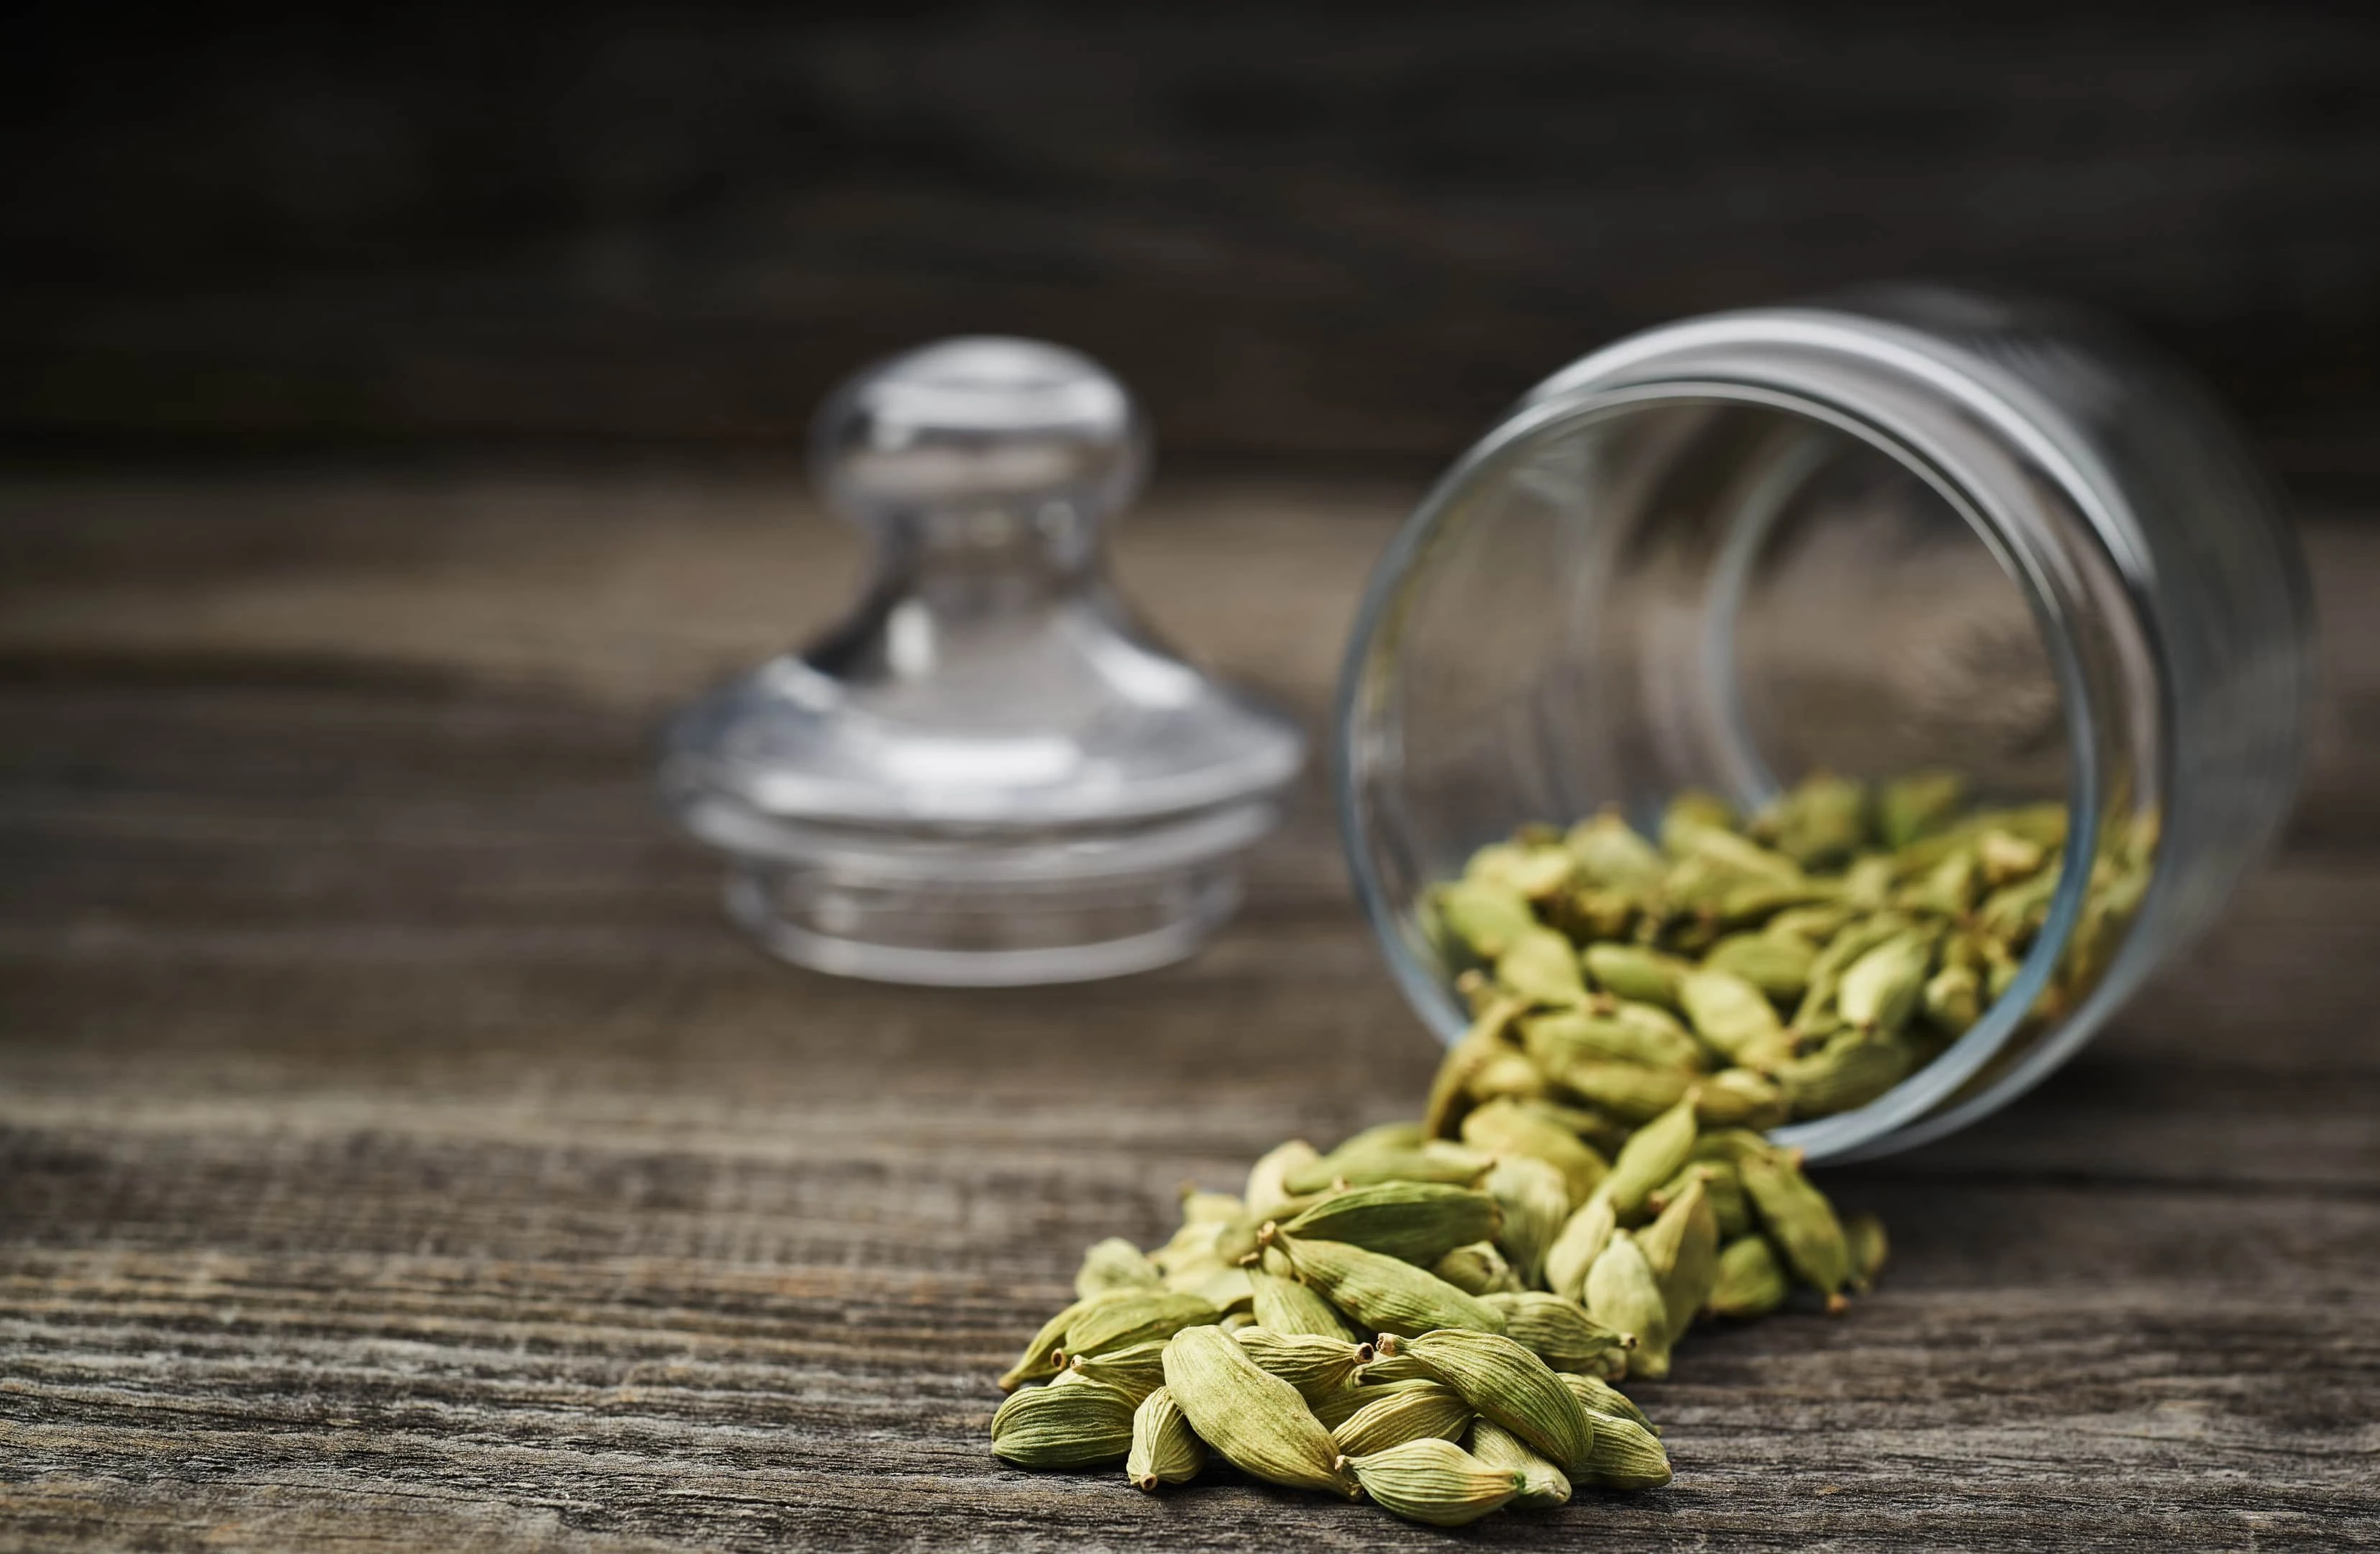 Green cardamom pods spill from glass jar on wooden table